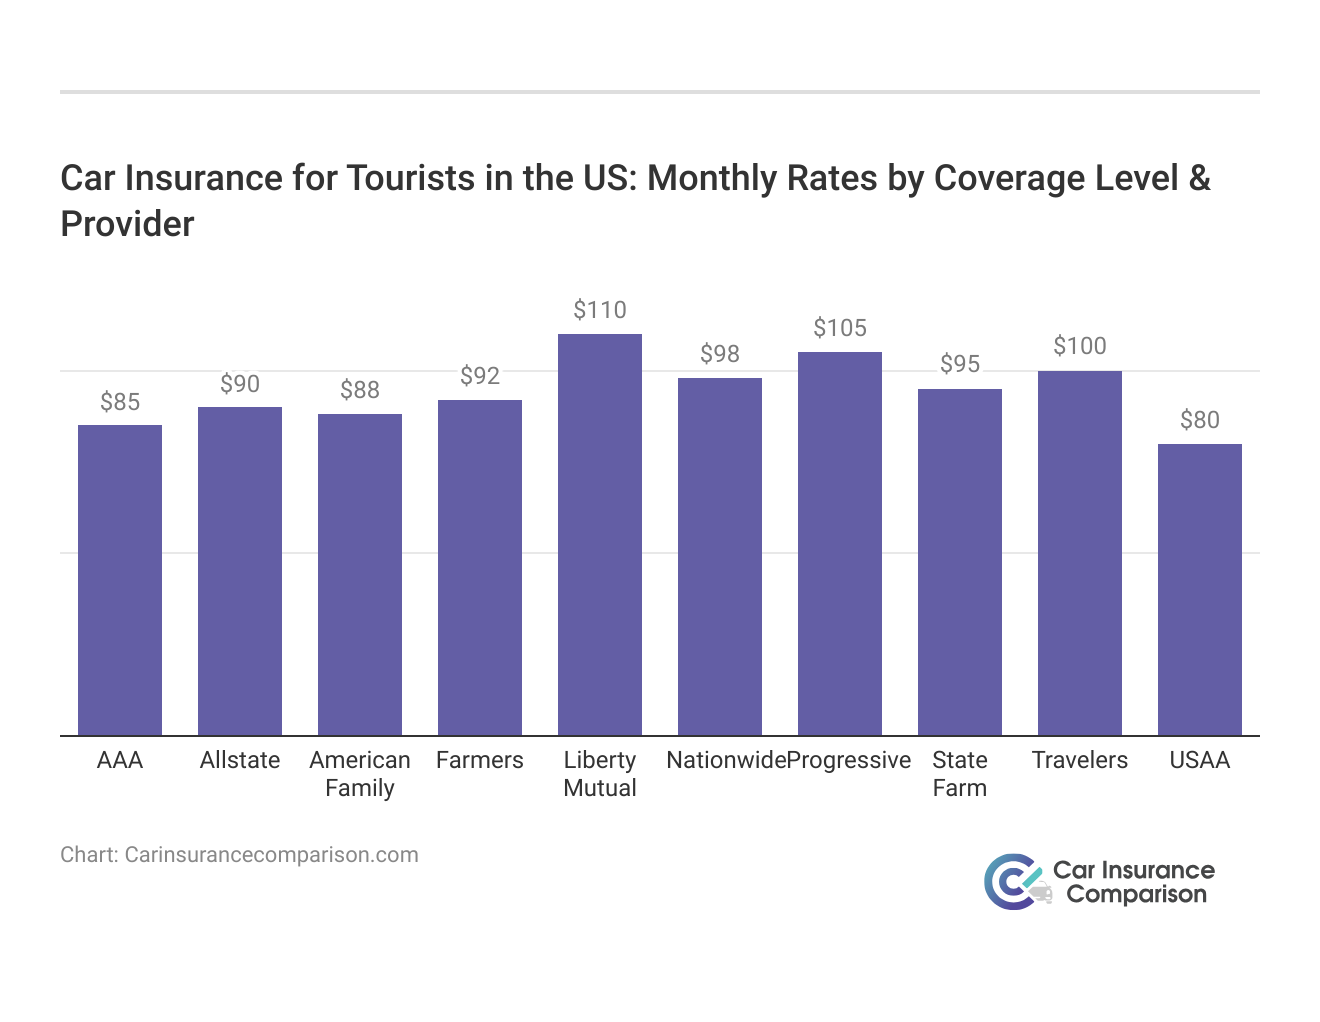 <h3>Car Insurance for Tourists in the US: Monthly Rates by Coverage Level & Provider</h3>